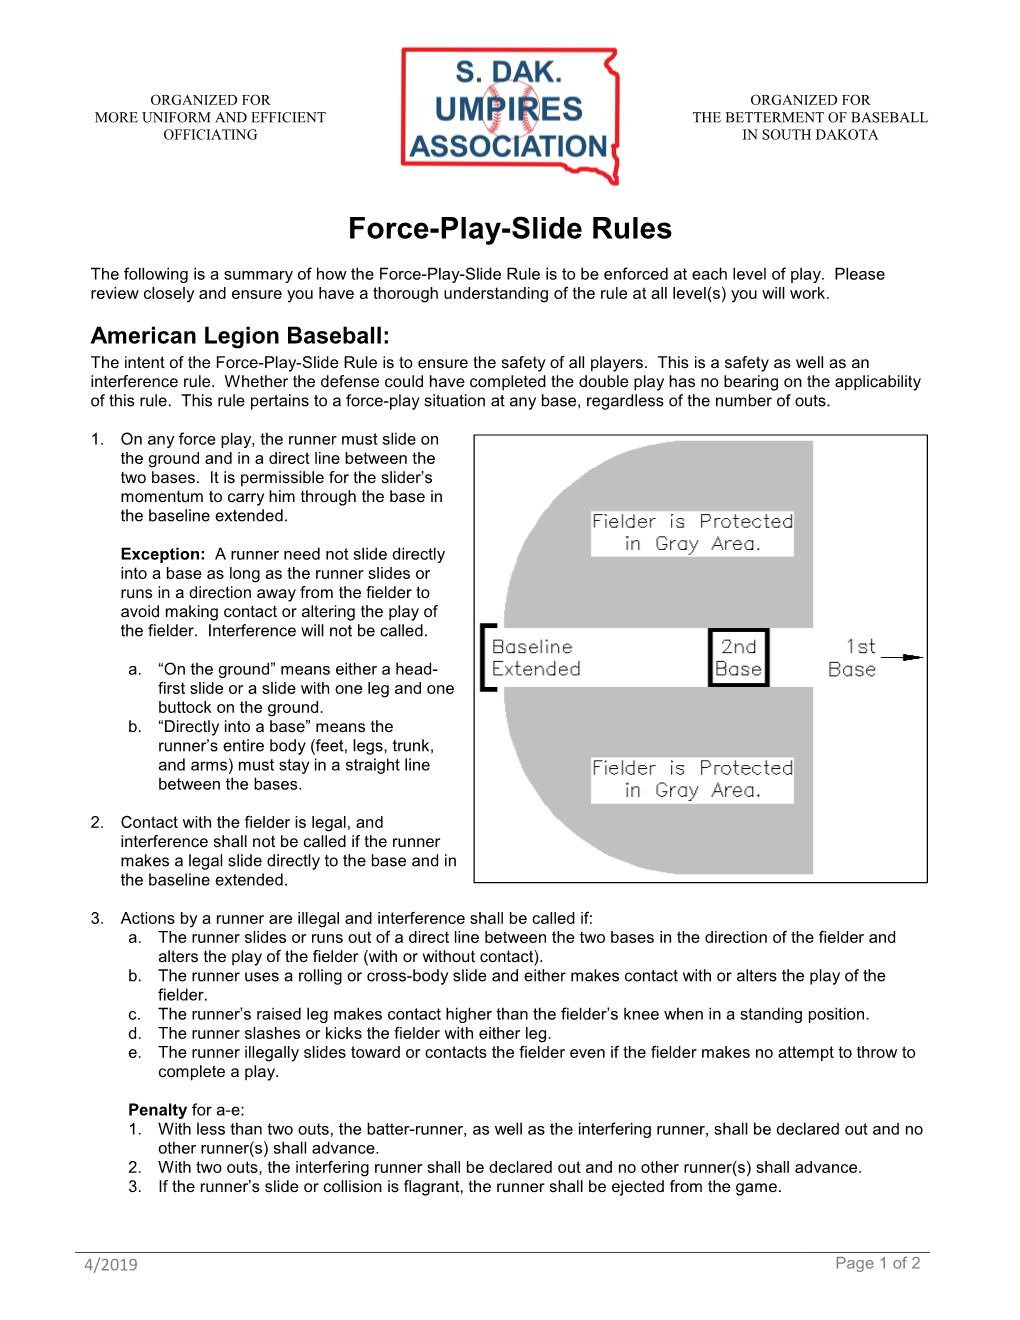 Force-Play-Slide Rules